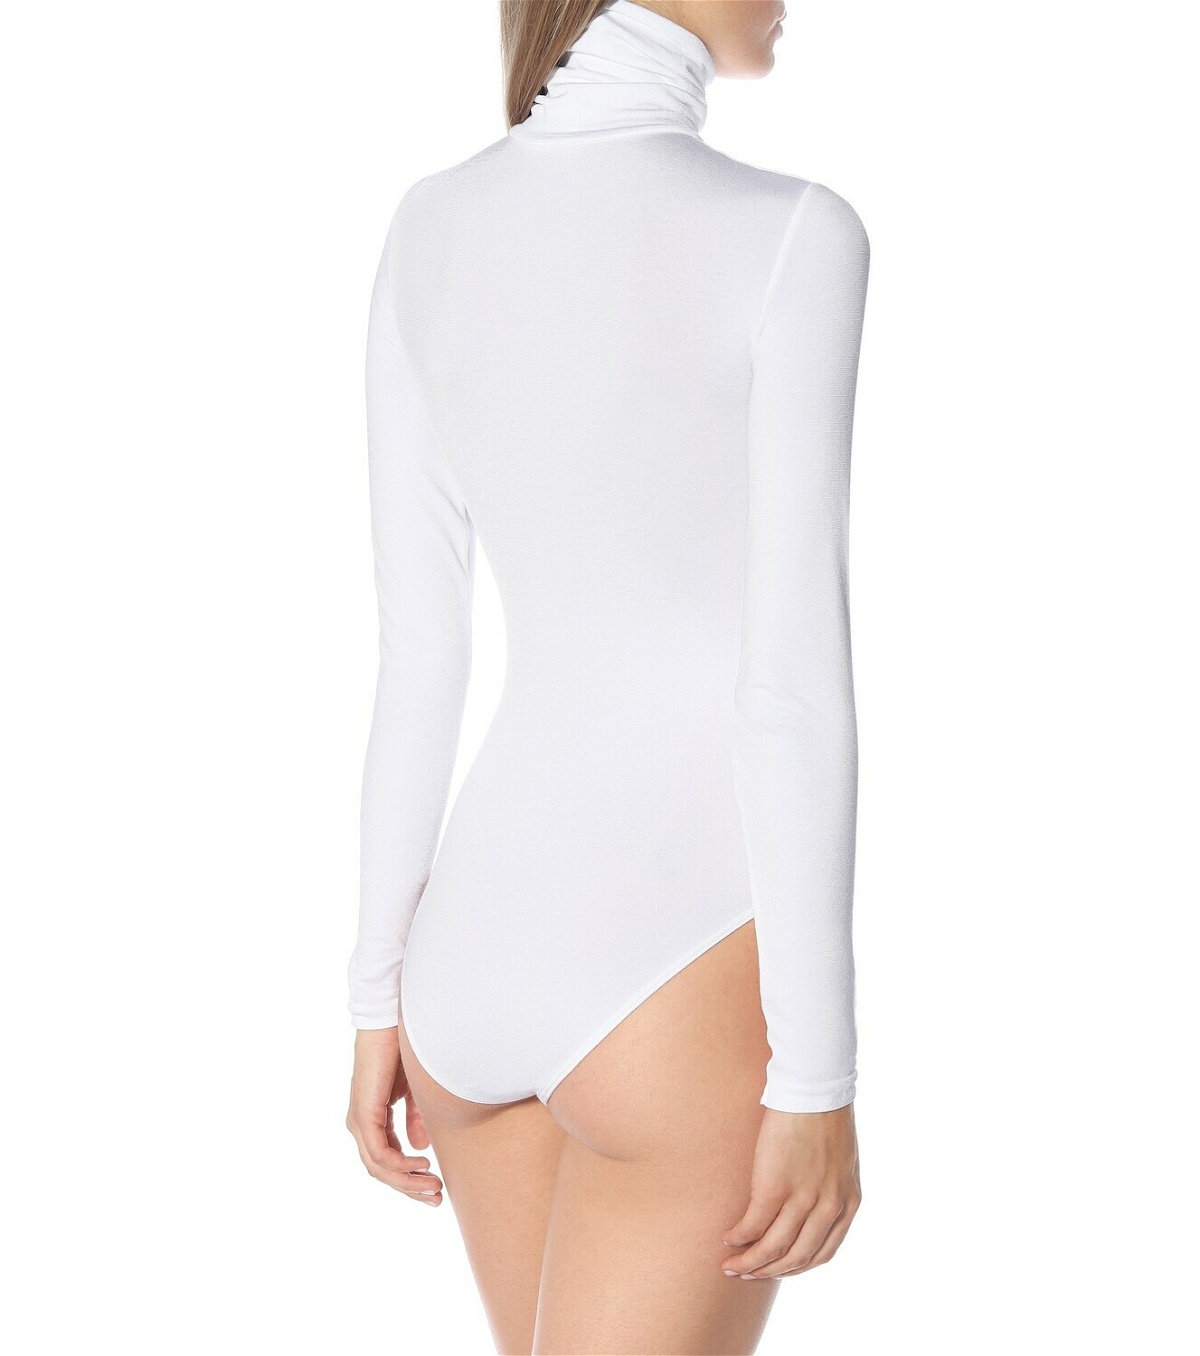 Wolford Wolford Colorado String Bodysuit Lingerie